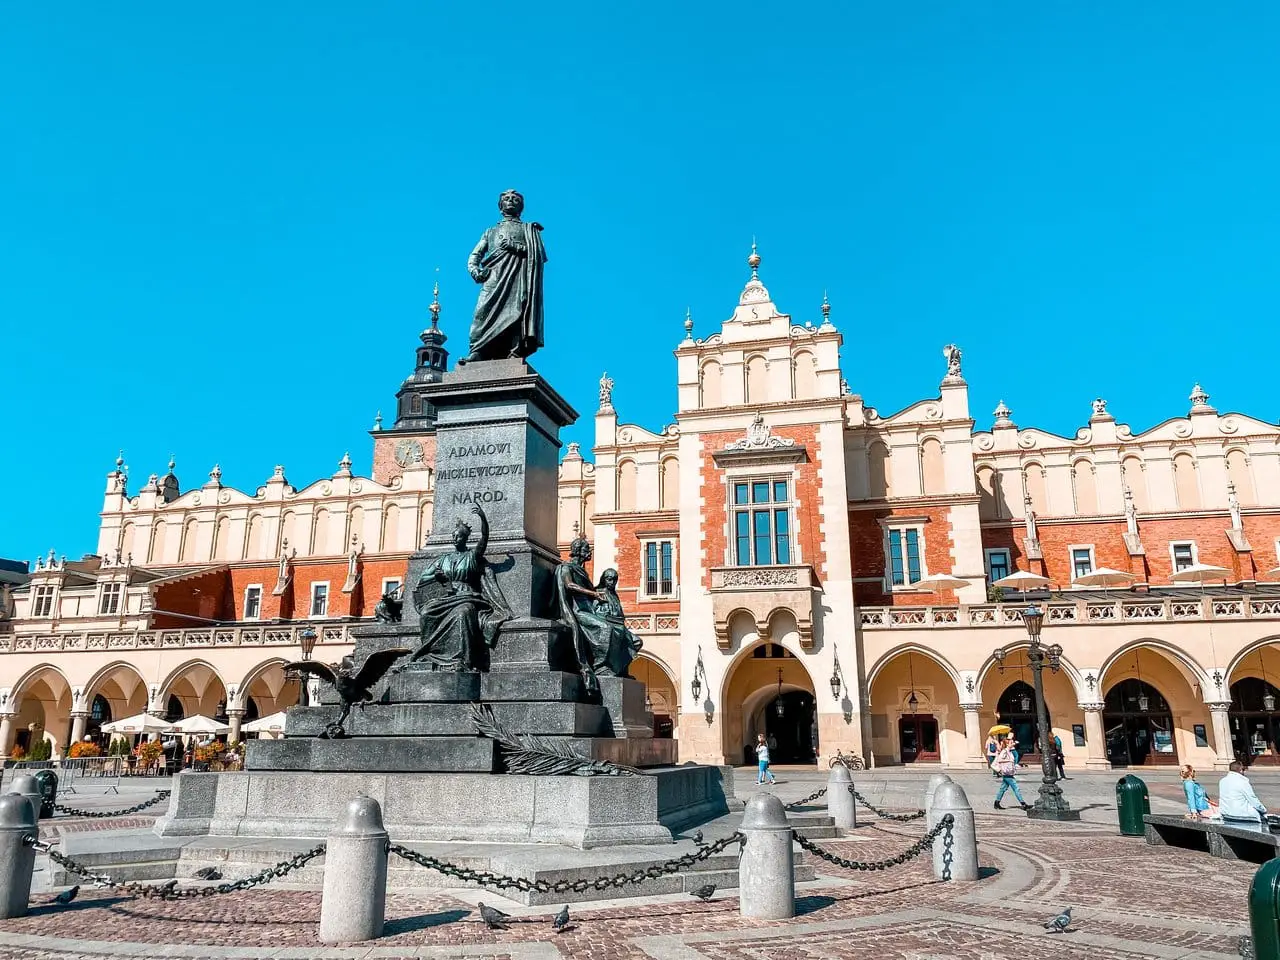 Rynek Square, one of the best things to see in Krakow